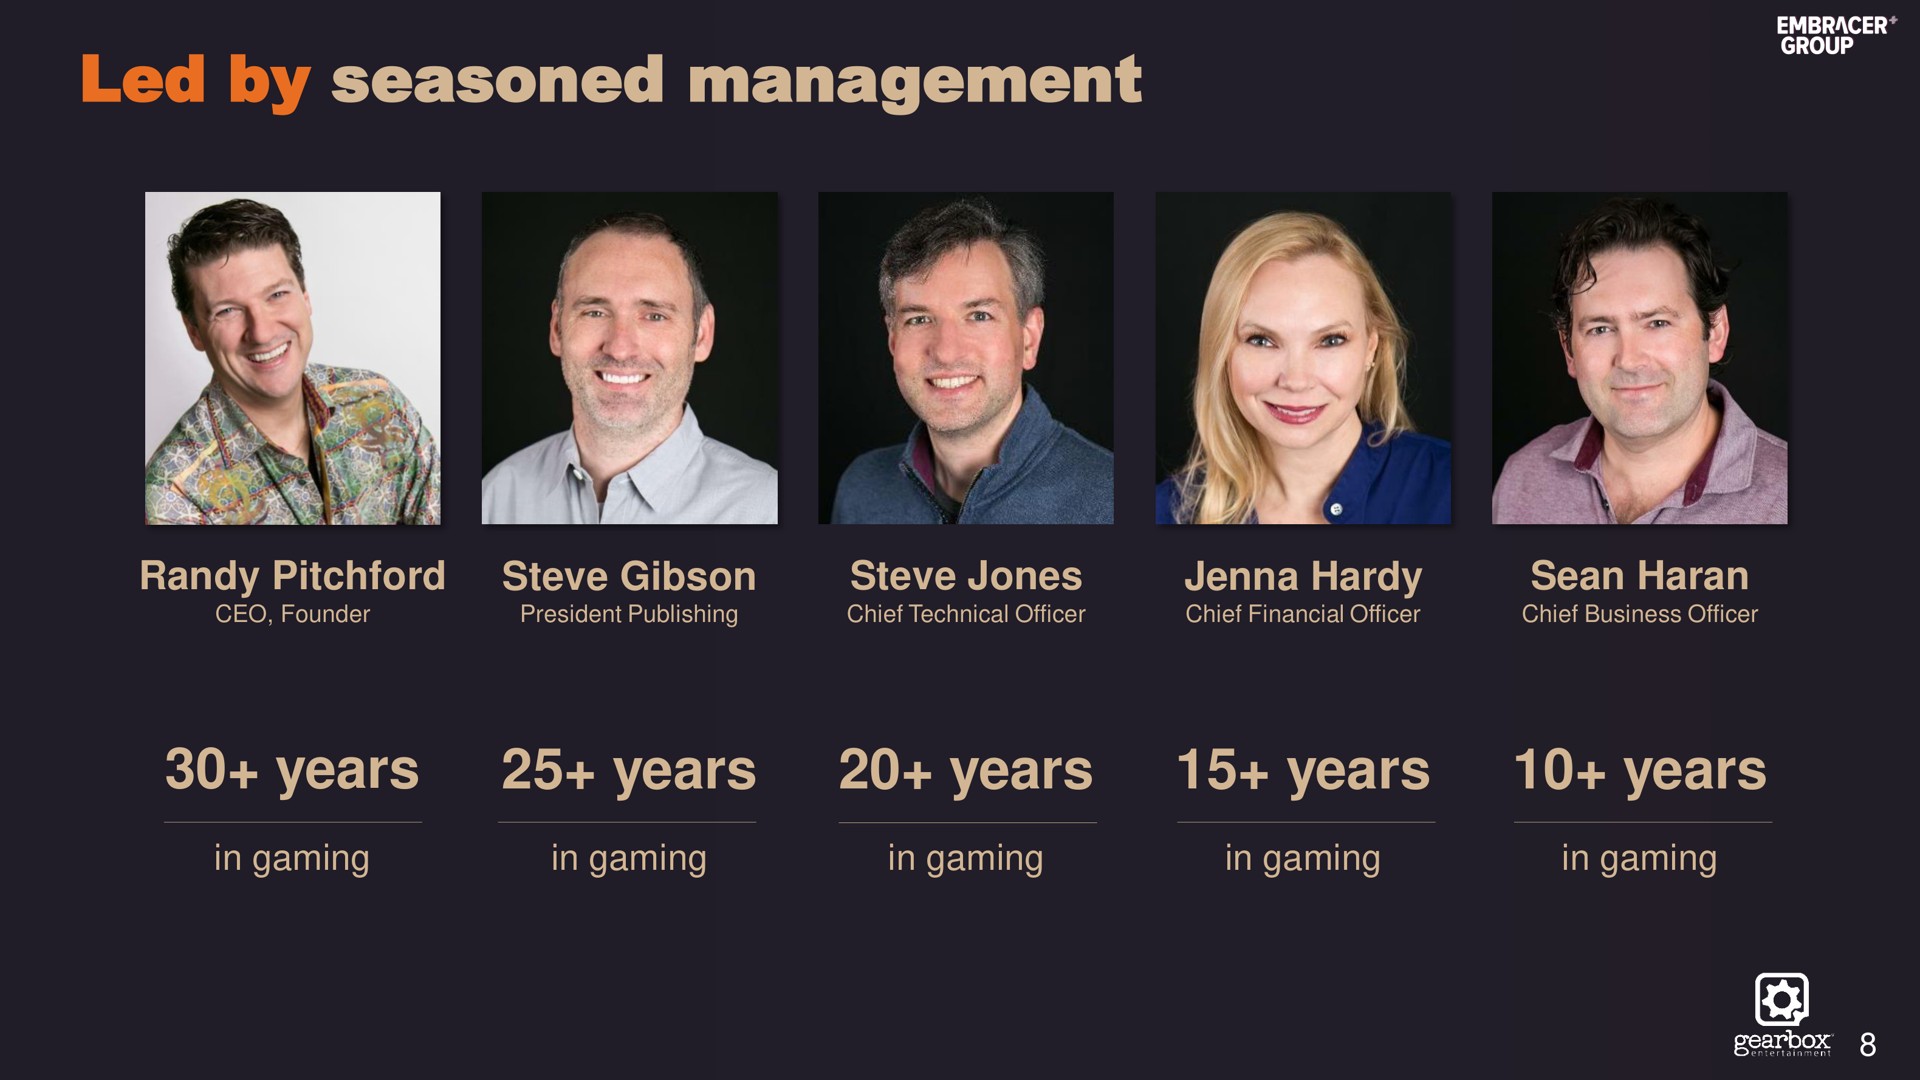 led by seasoned management years years years years years | Embracer Group